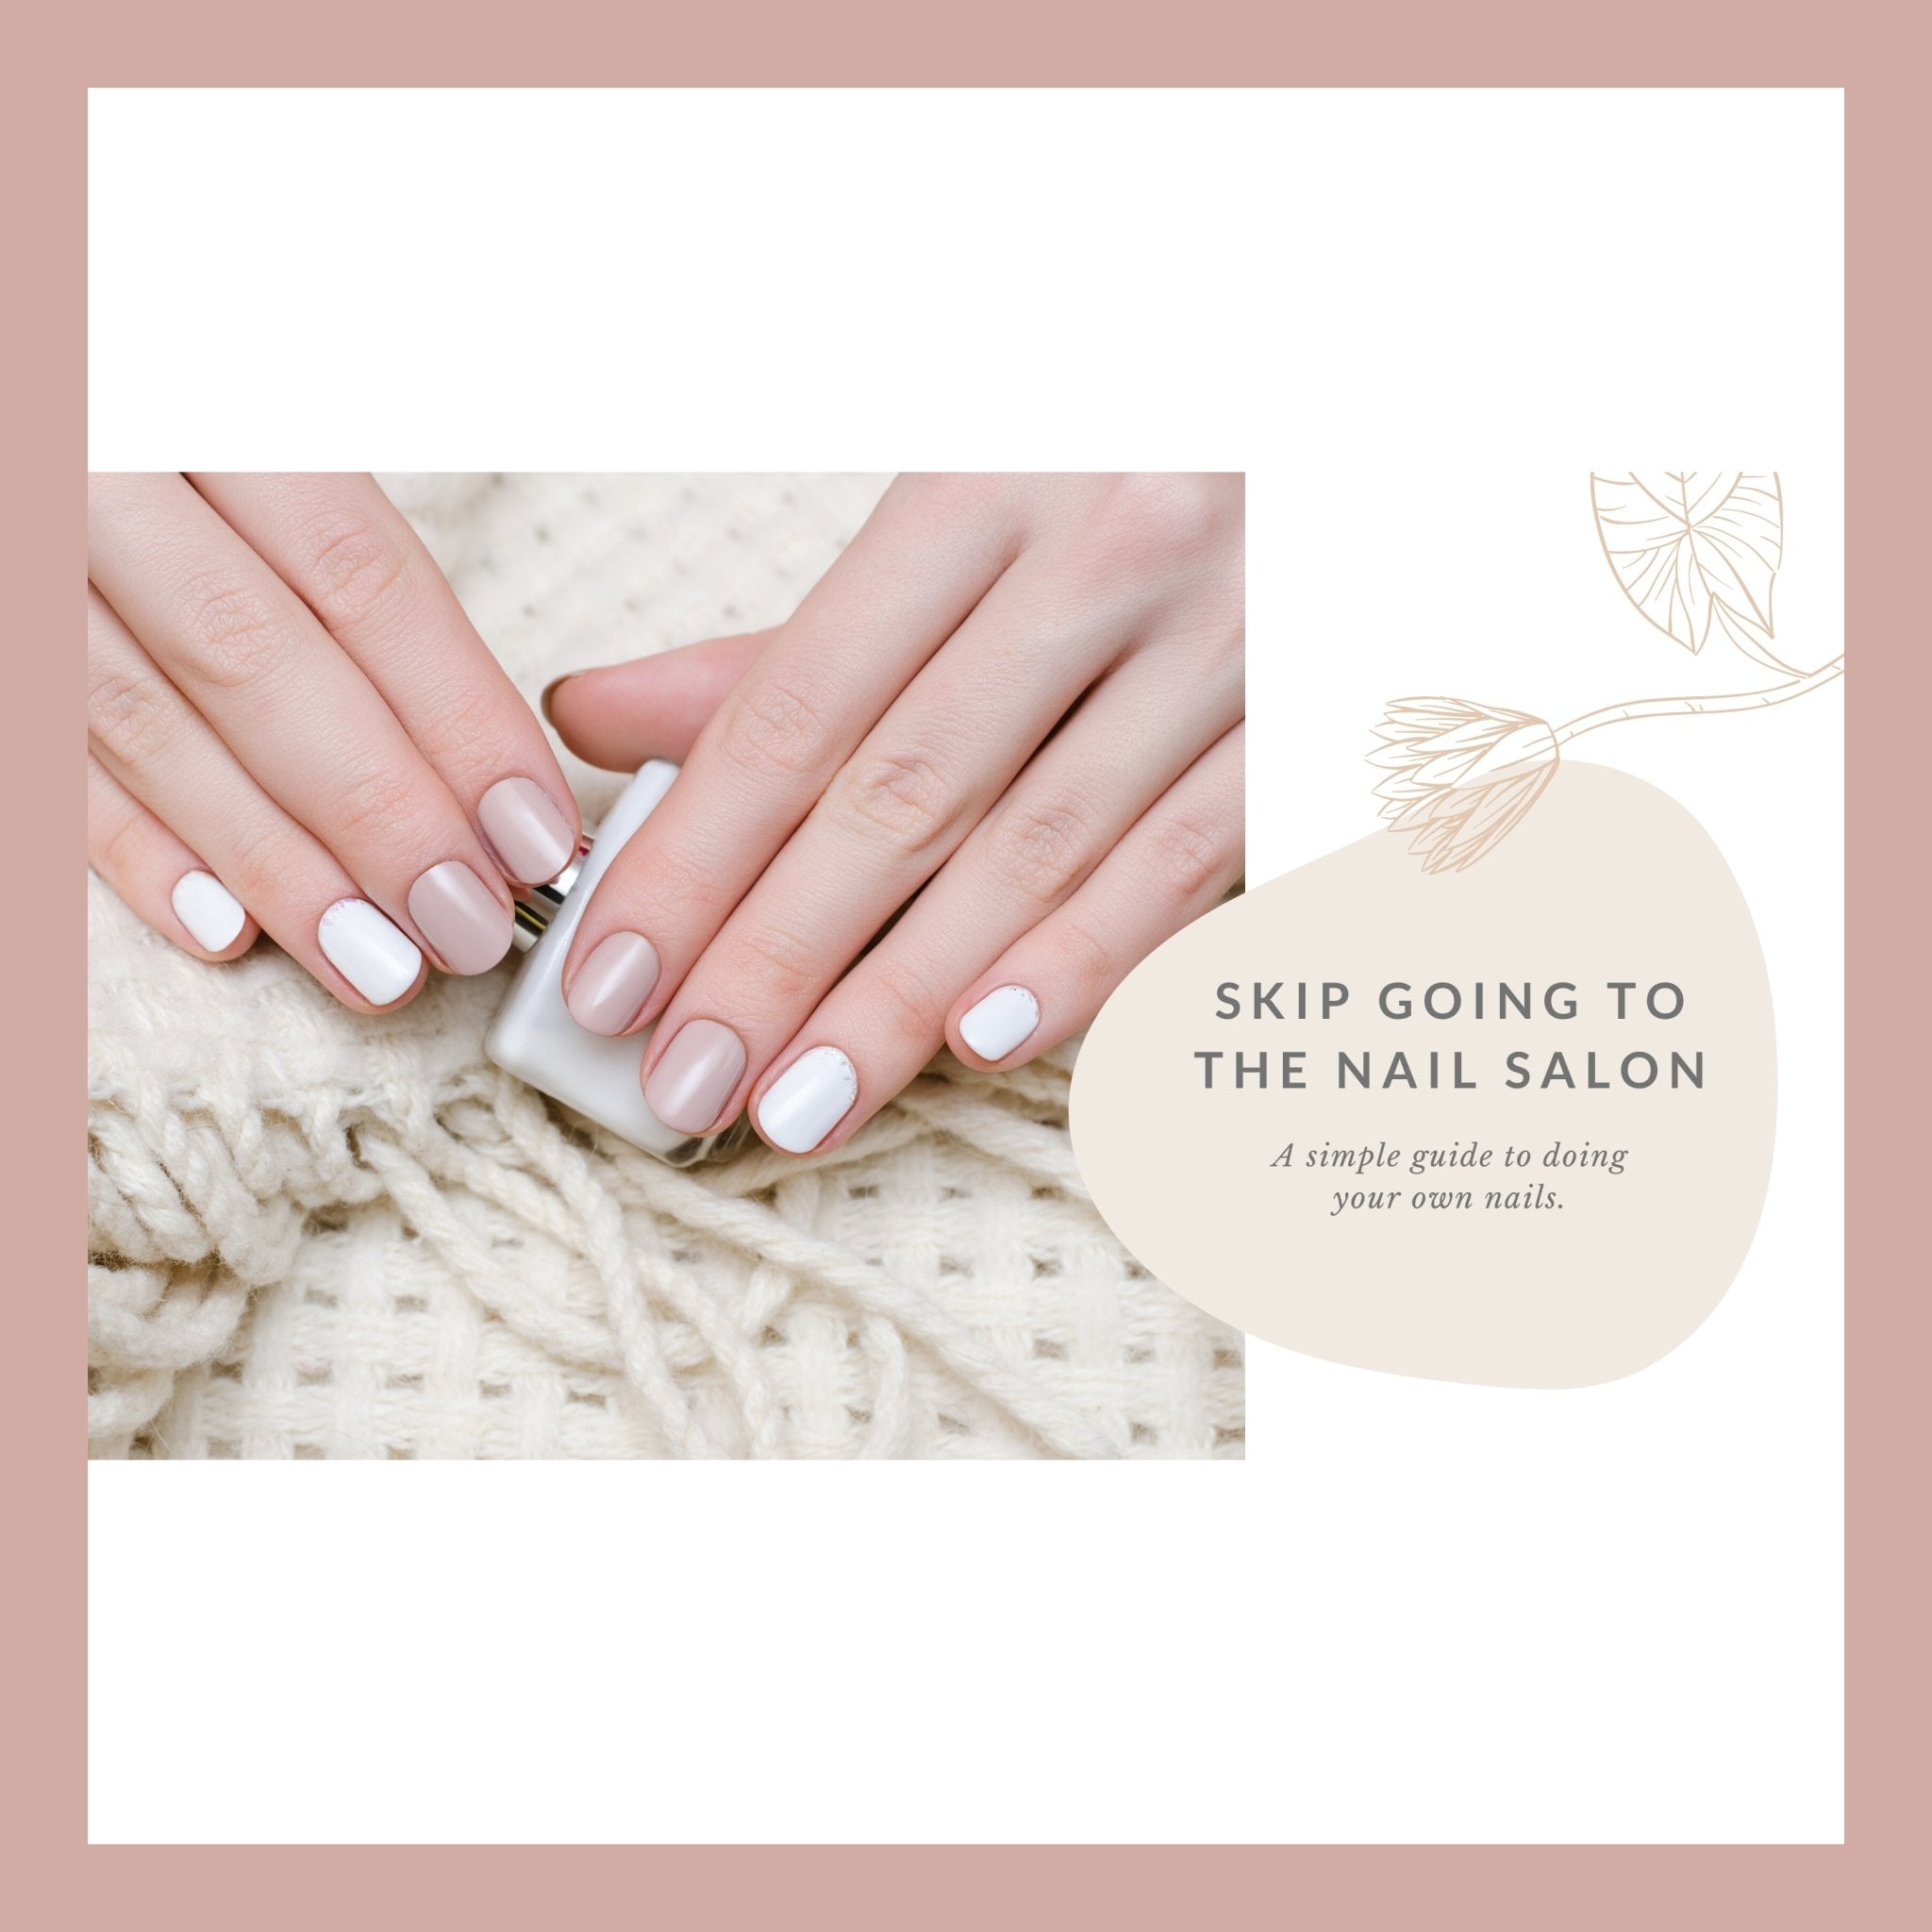 11 Ideas to Spice Up Your At-Home Manicure | The Everygirl